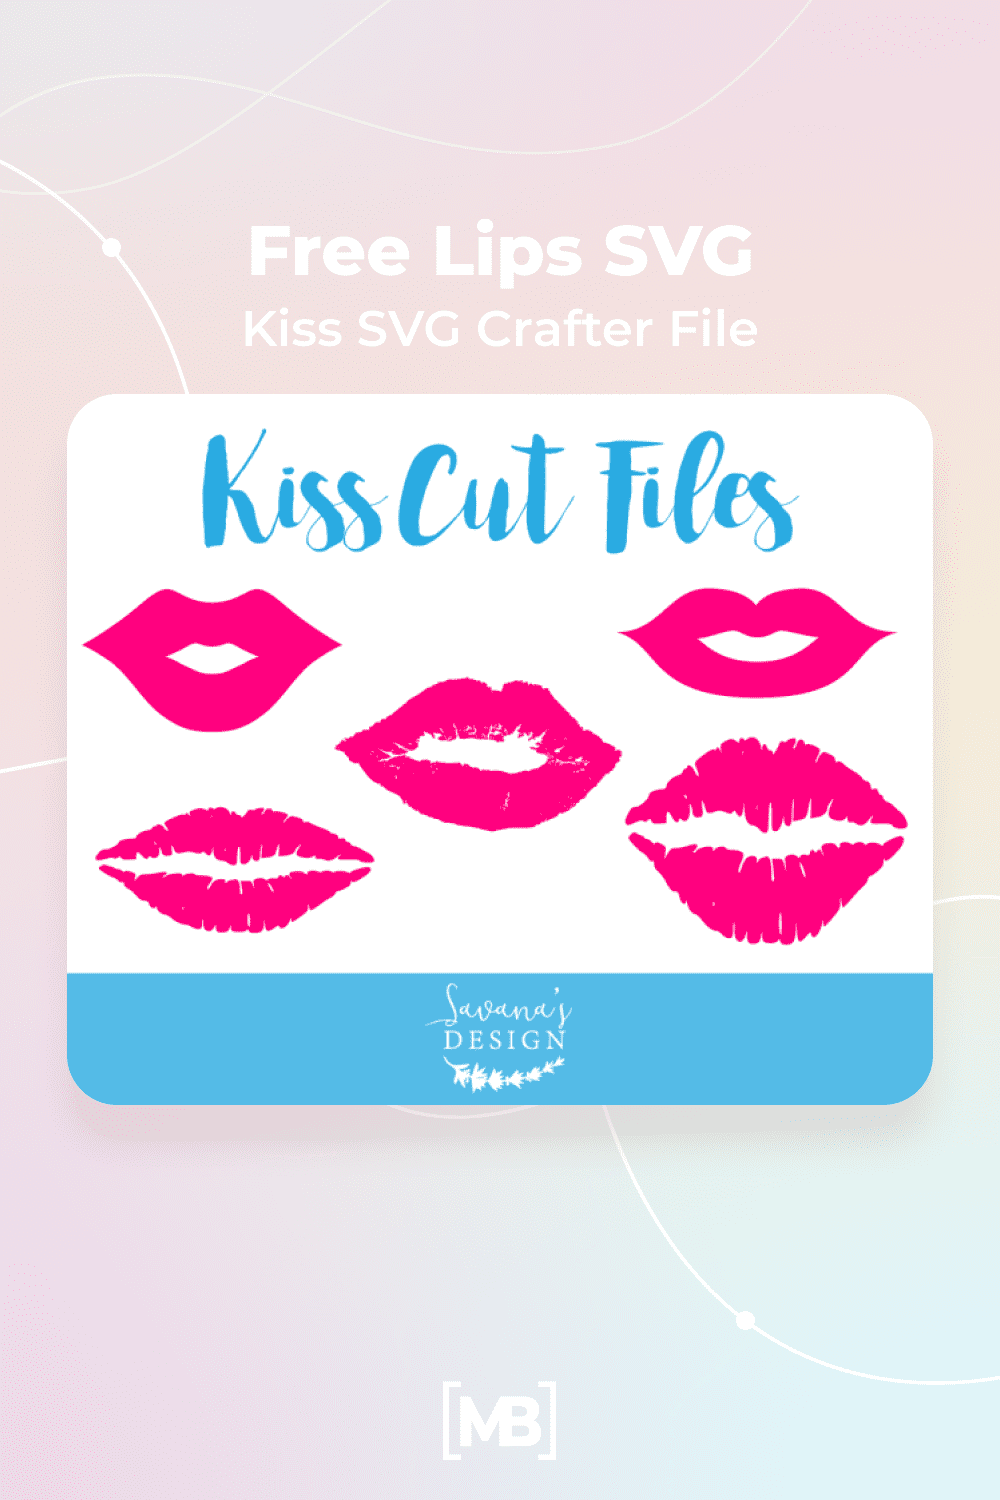 Free Lips SVG / Kiss SVG Crafter File.